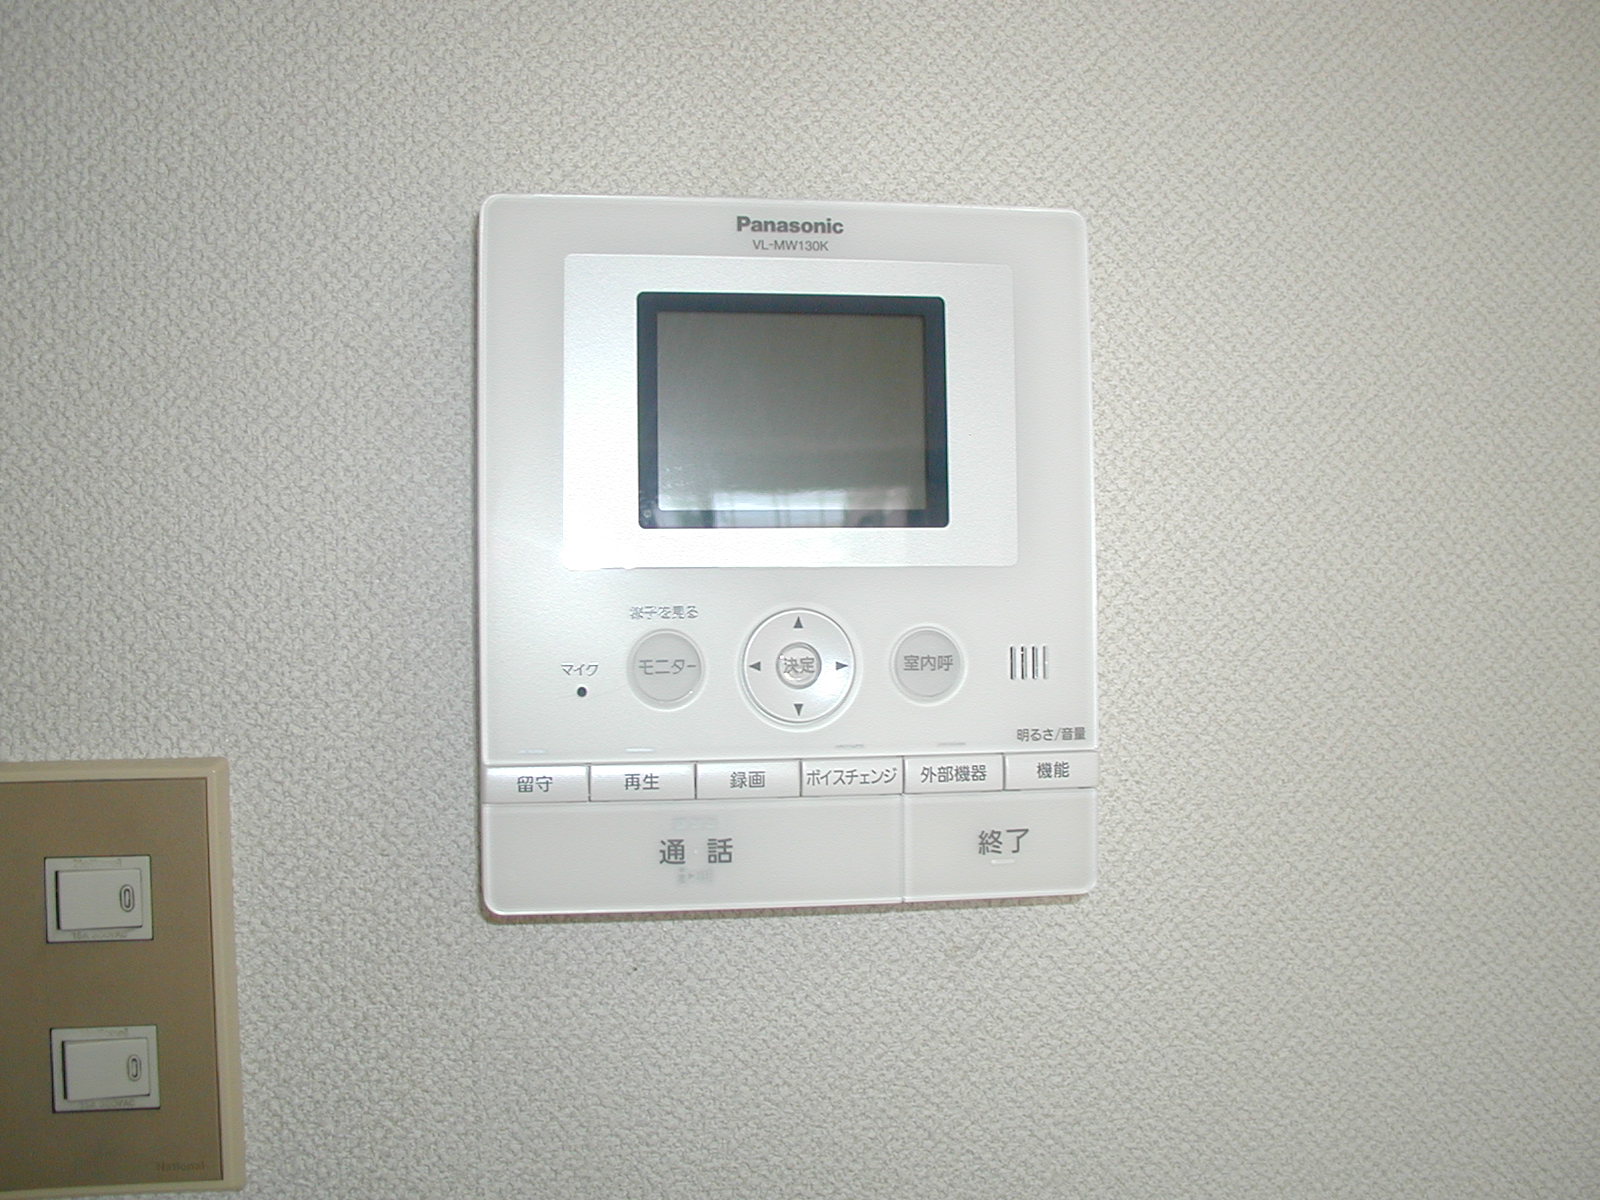 Other Equipment. With TV monitor intercom